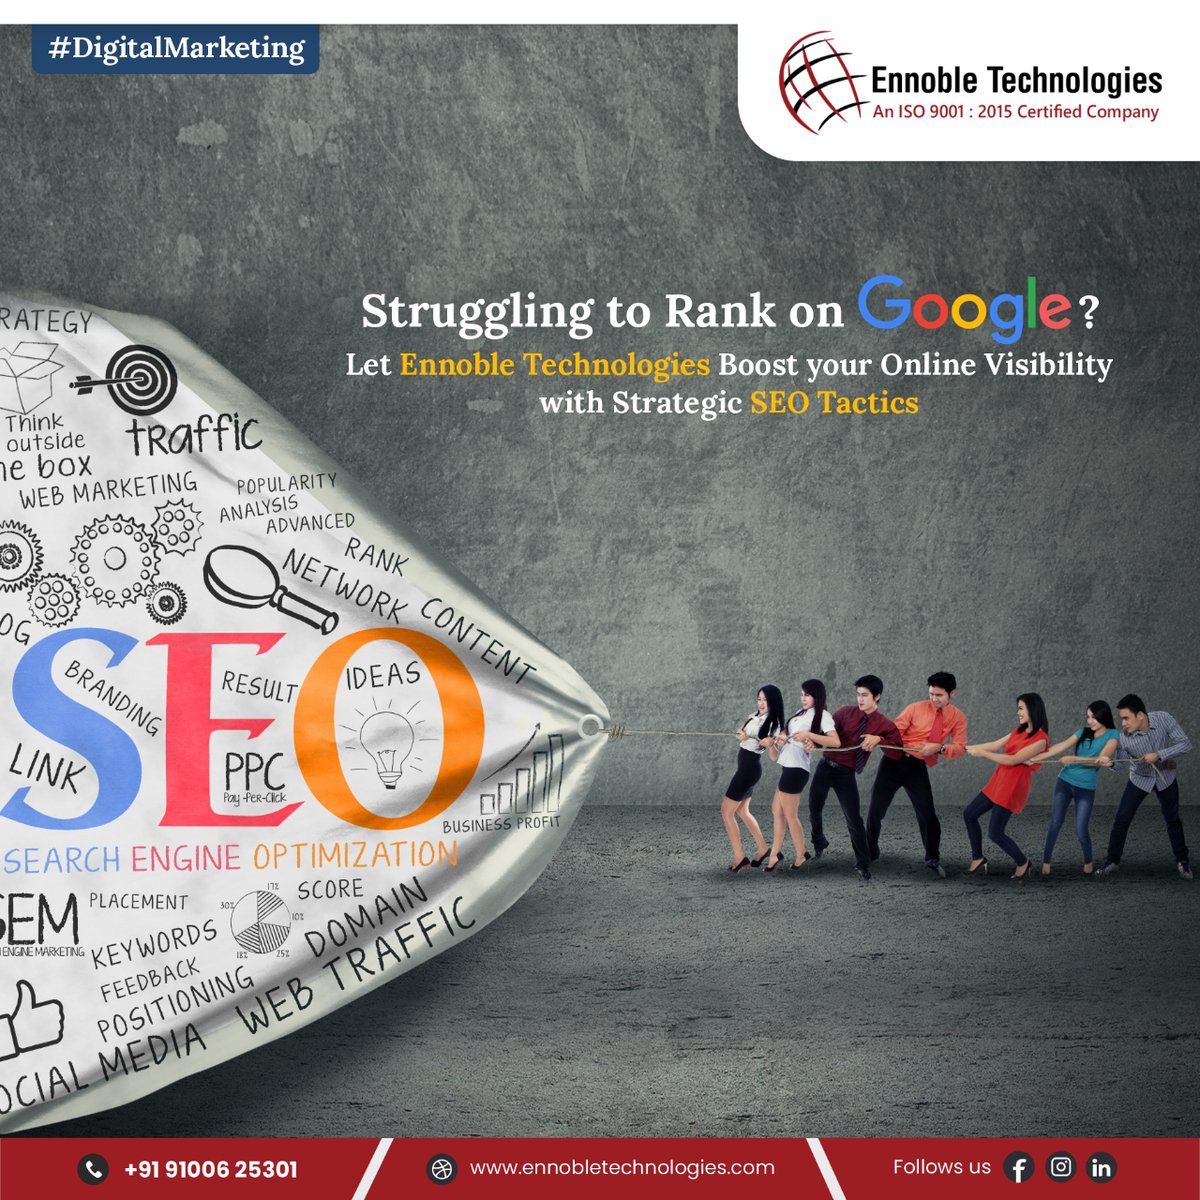 Struggling to rank on Google?🌐

Let #EnnobleTechnologies boost your online visibility with strategic SEO tactics.🚀

Dominate search results and outshine your competitors.💼

#SEO #SearchRanking #OnlineVisibility #DigitalMarketing #SEOExpert #KeywordResearch #GoogleRanking